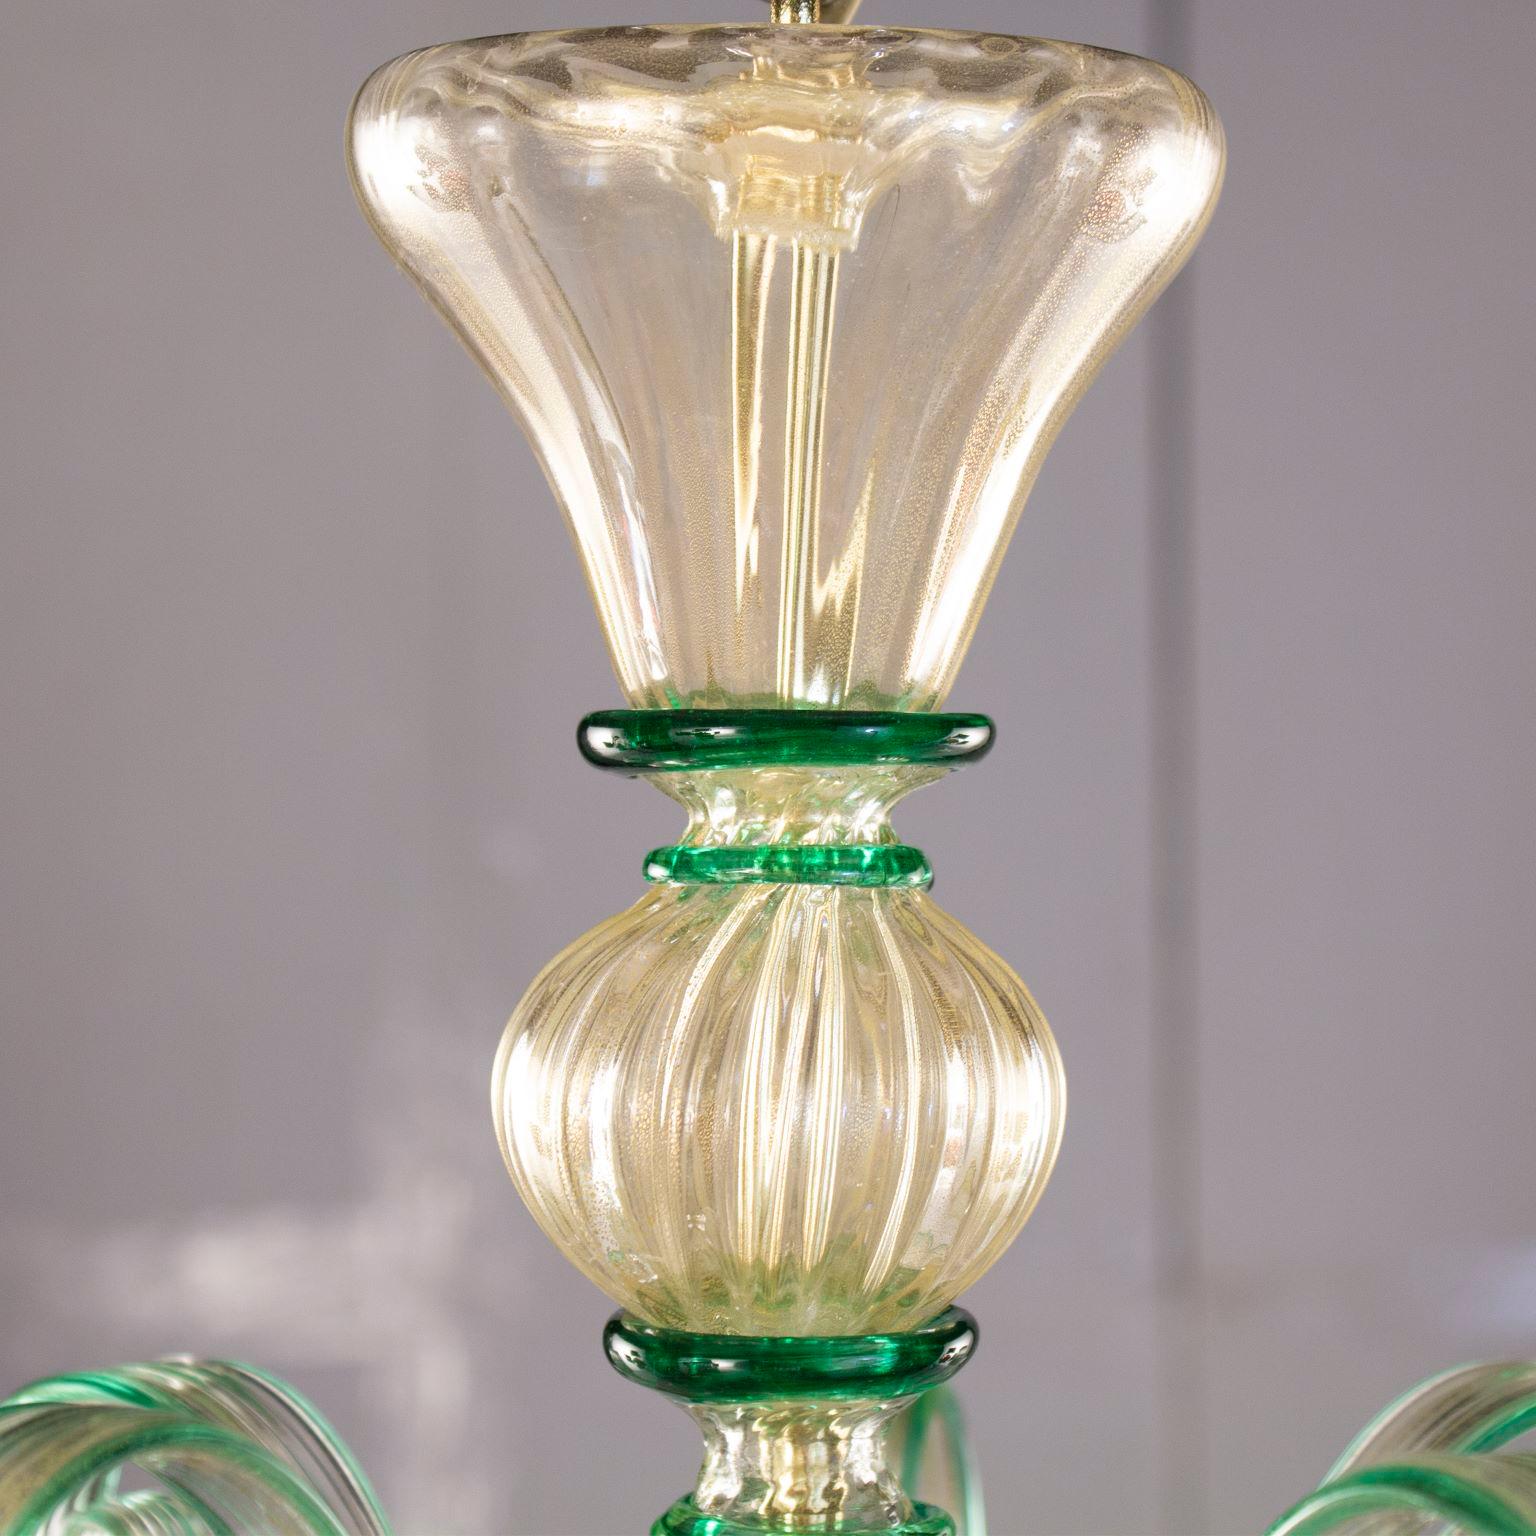 Italian Chandelier 5Arms Golden Leaf Murano Glass green details by Multiforme in stock